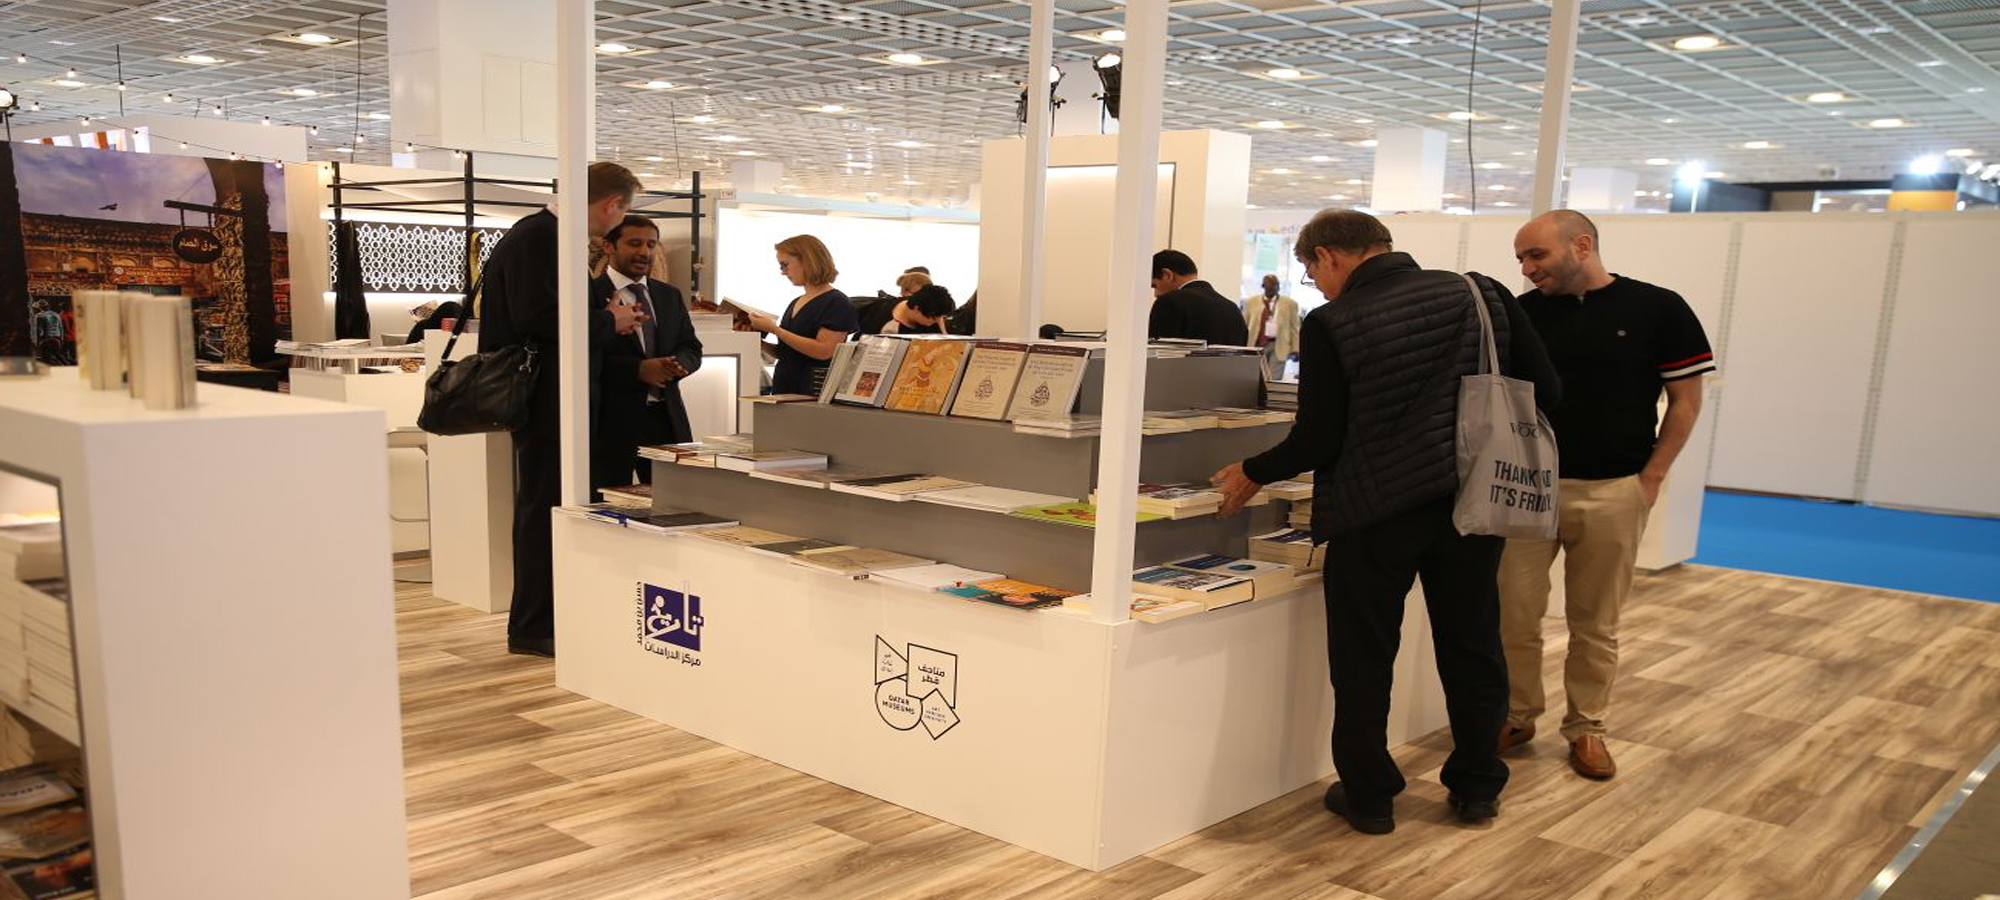 The Center participates with its publications in the Frankfurt International Book Fair (Oct. 2017)